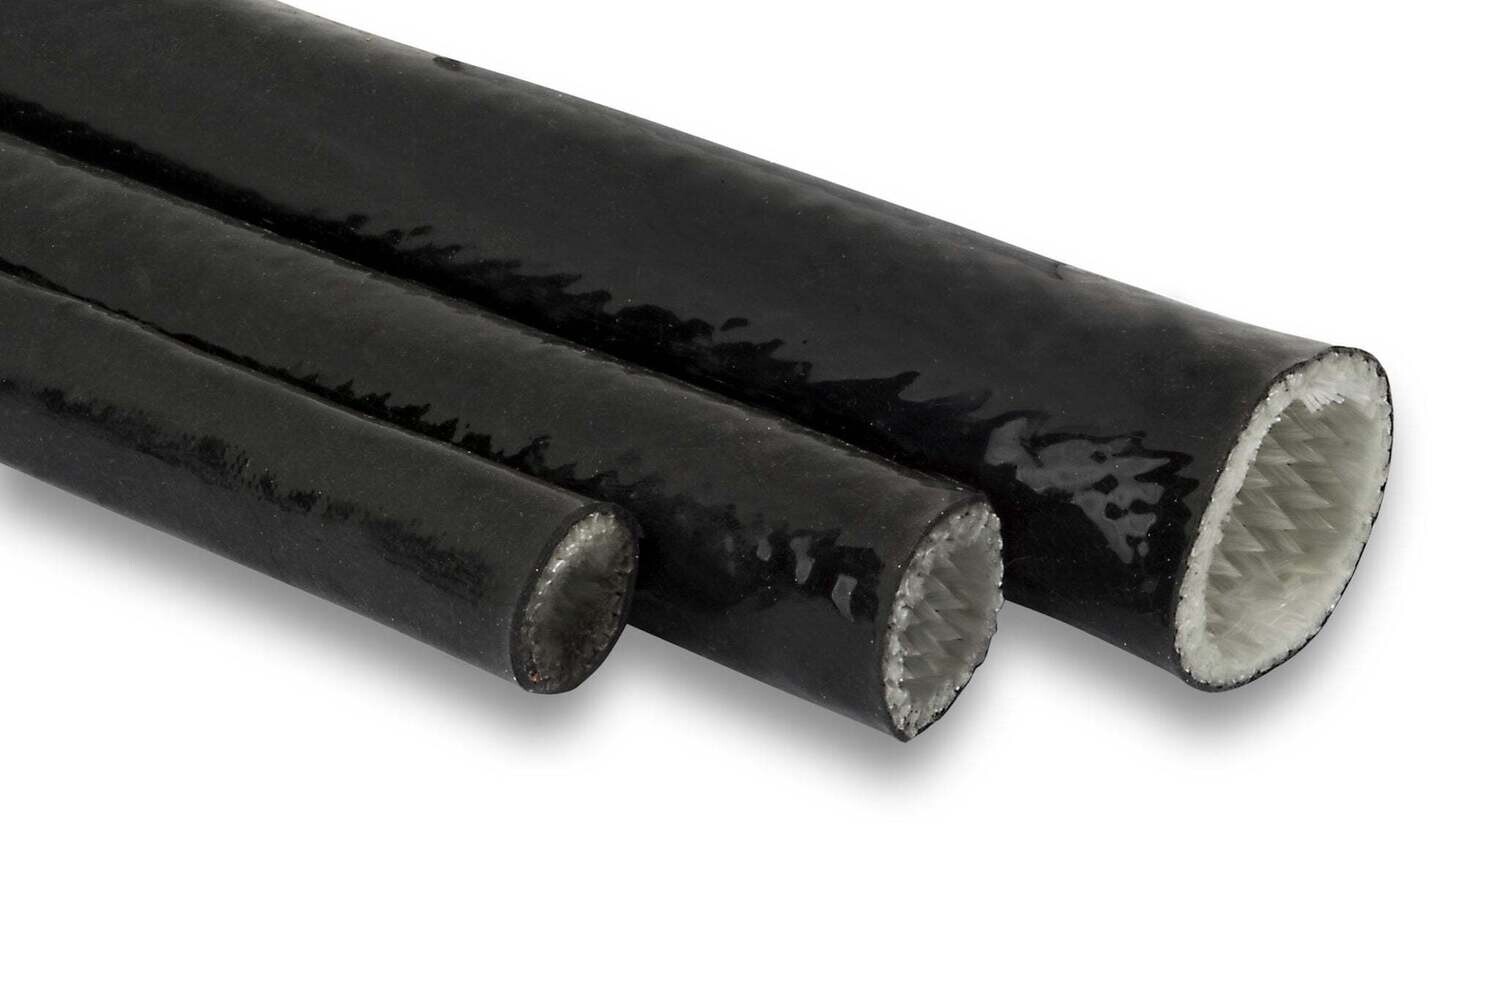 Black Silicon High Heat Sleeve - 15mm, 5.0m Multiple Qty will come on a continuous Roll